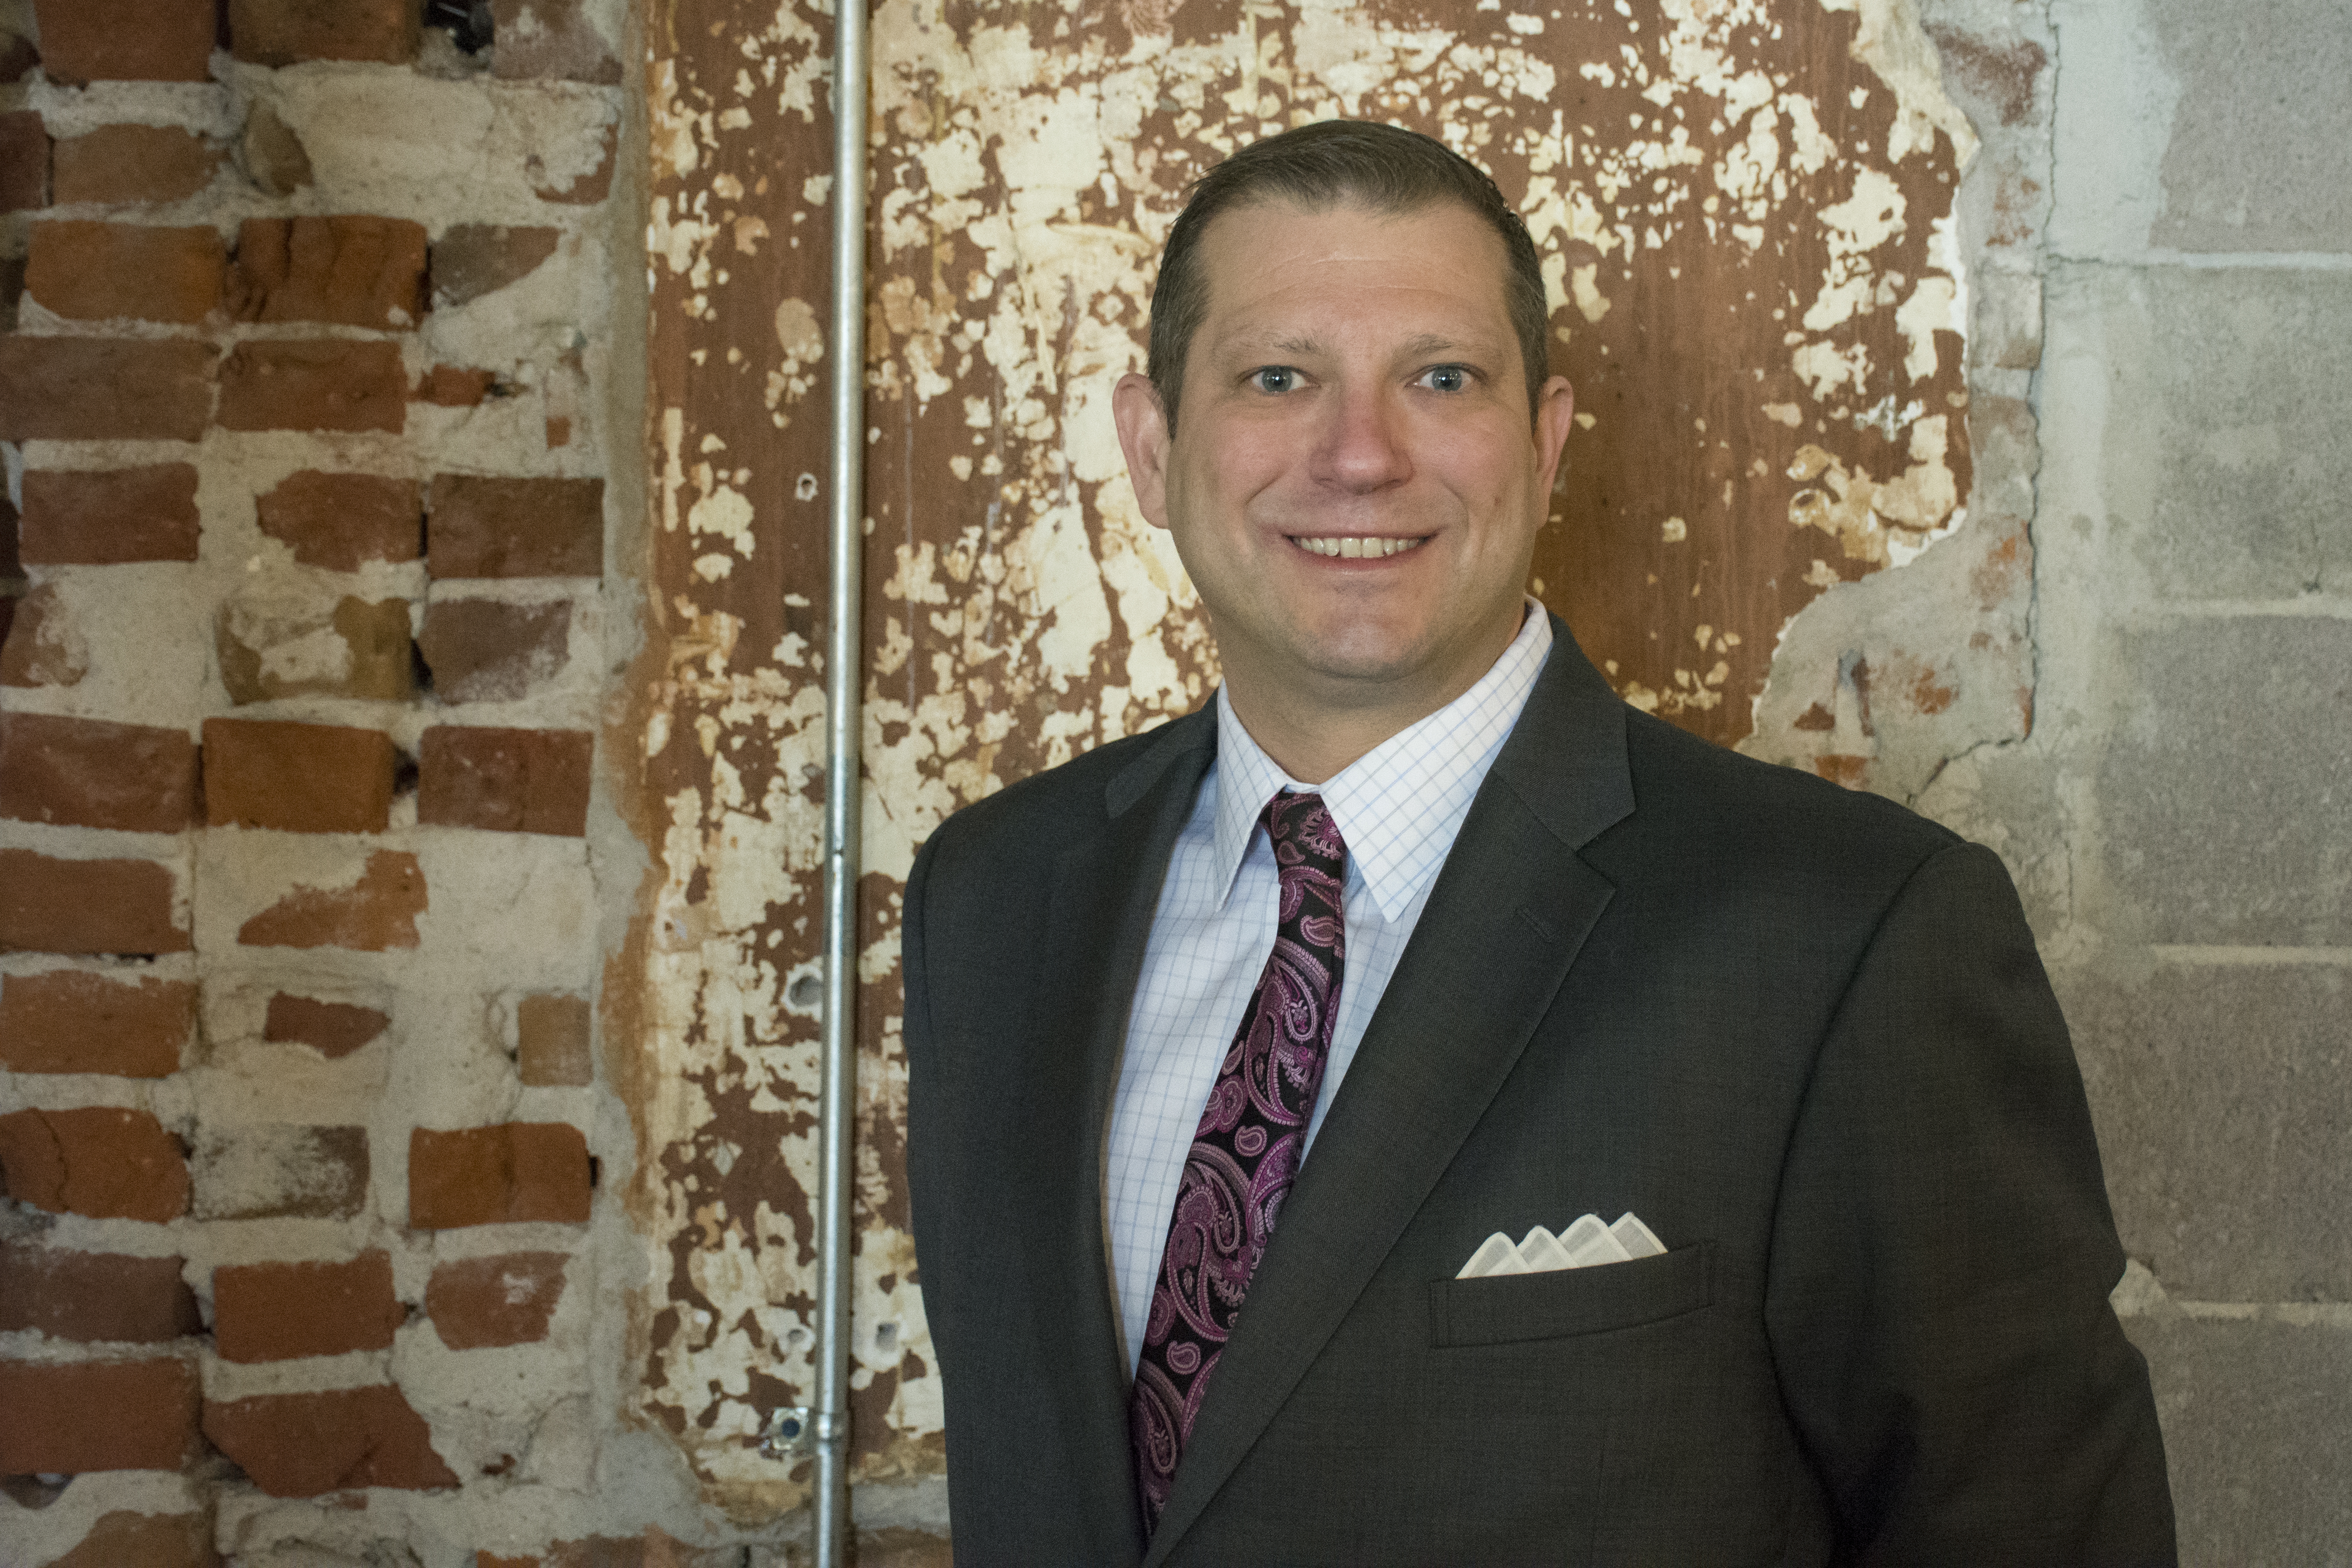 white man in a suit standing in front of a brick wall smiling